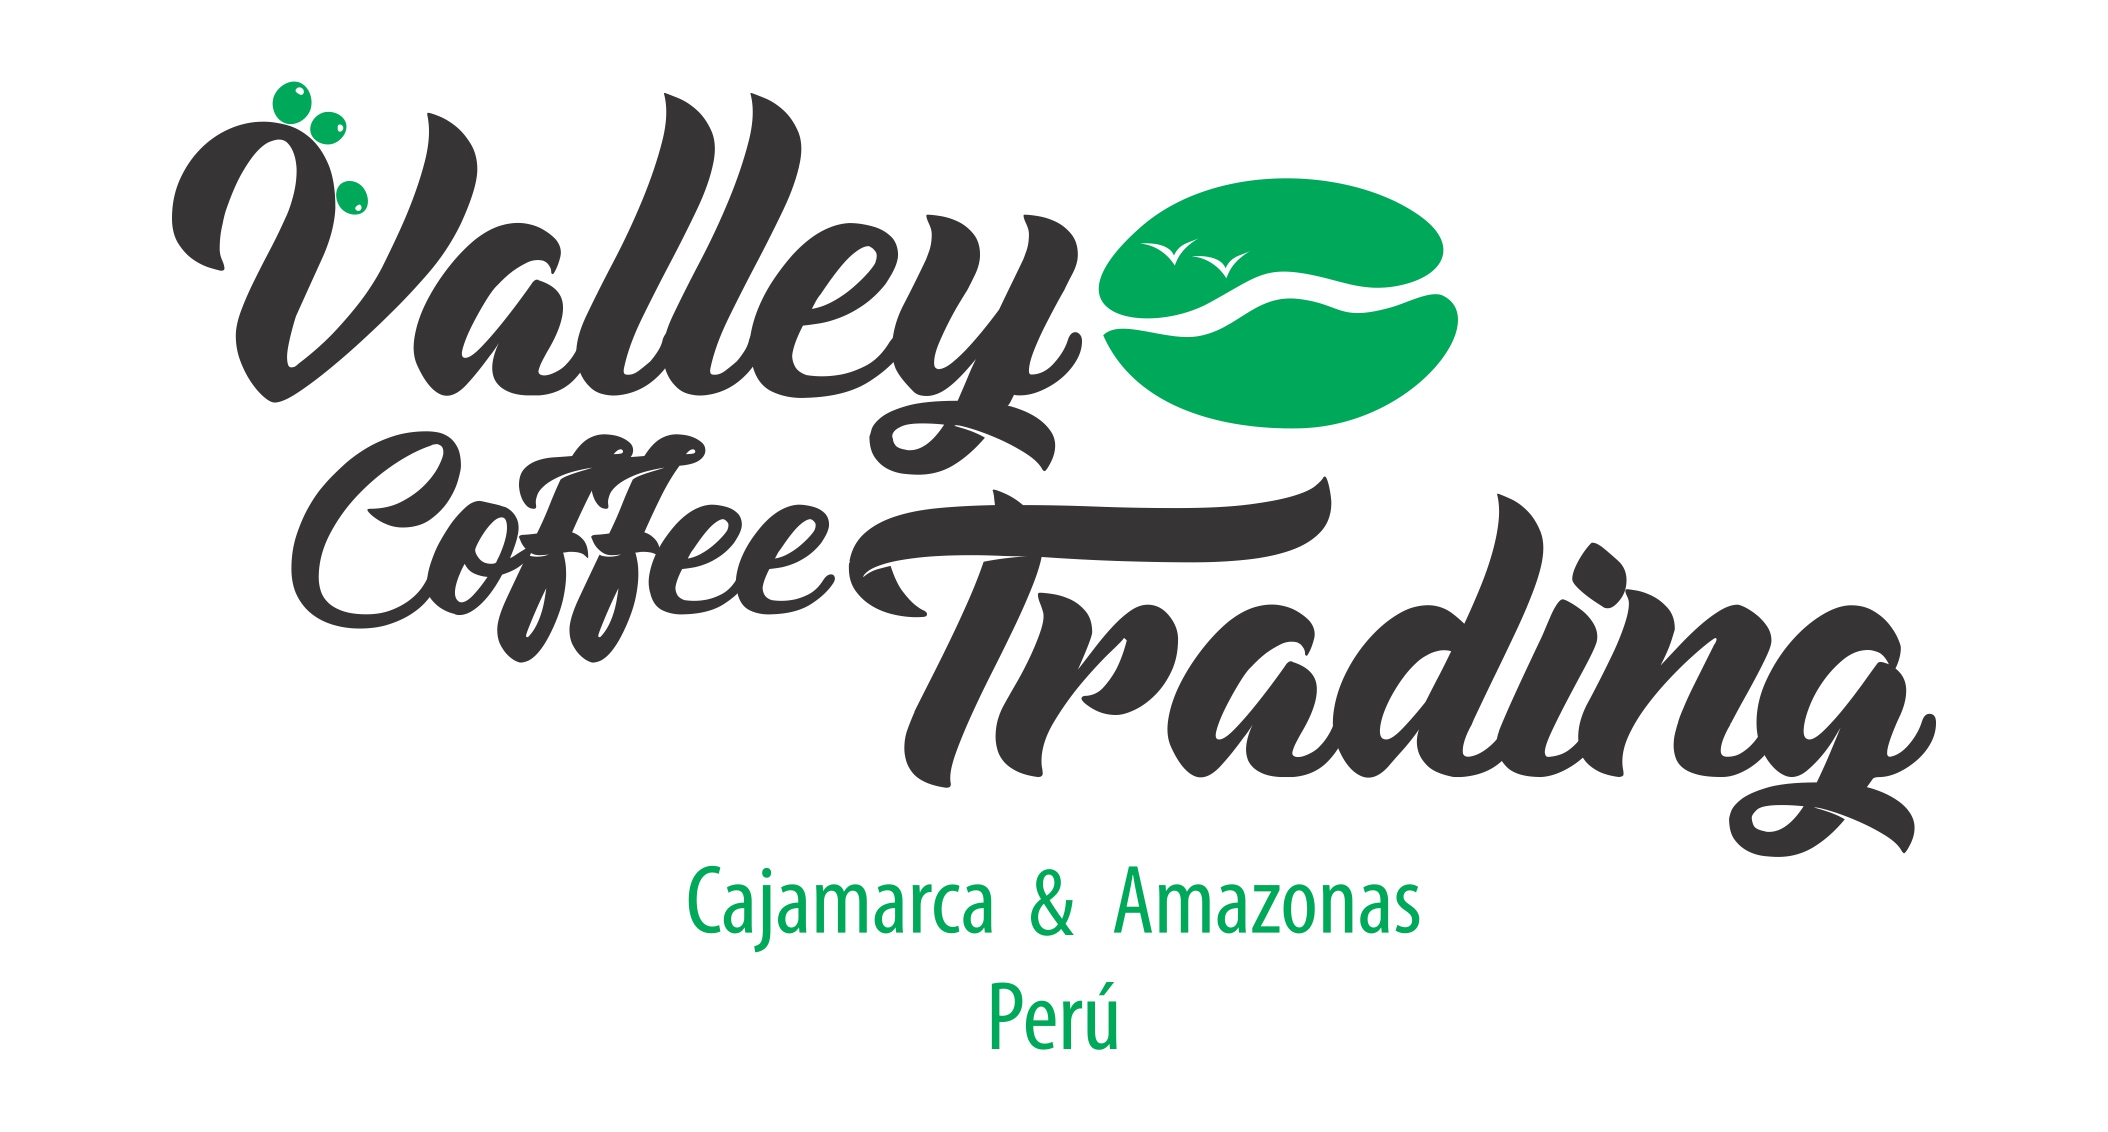 VALLEY COFFEE TRADING S.A.C